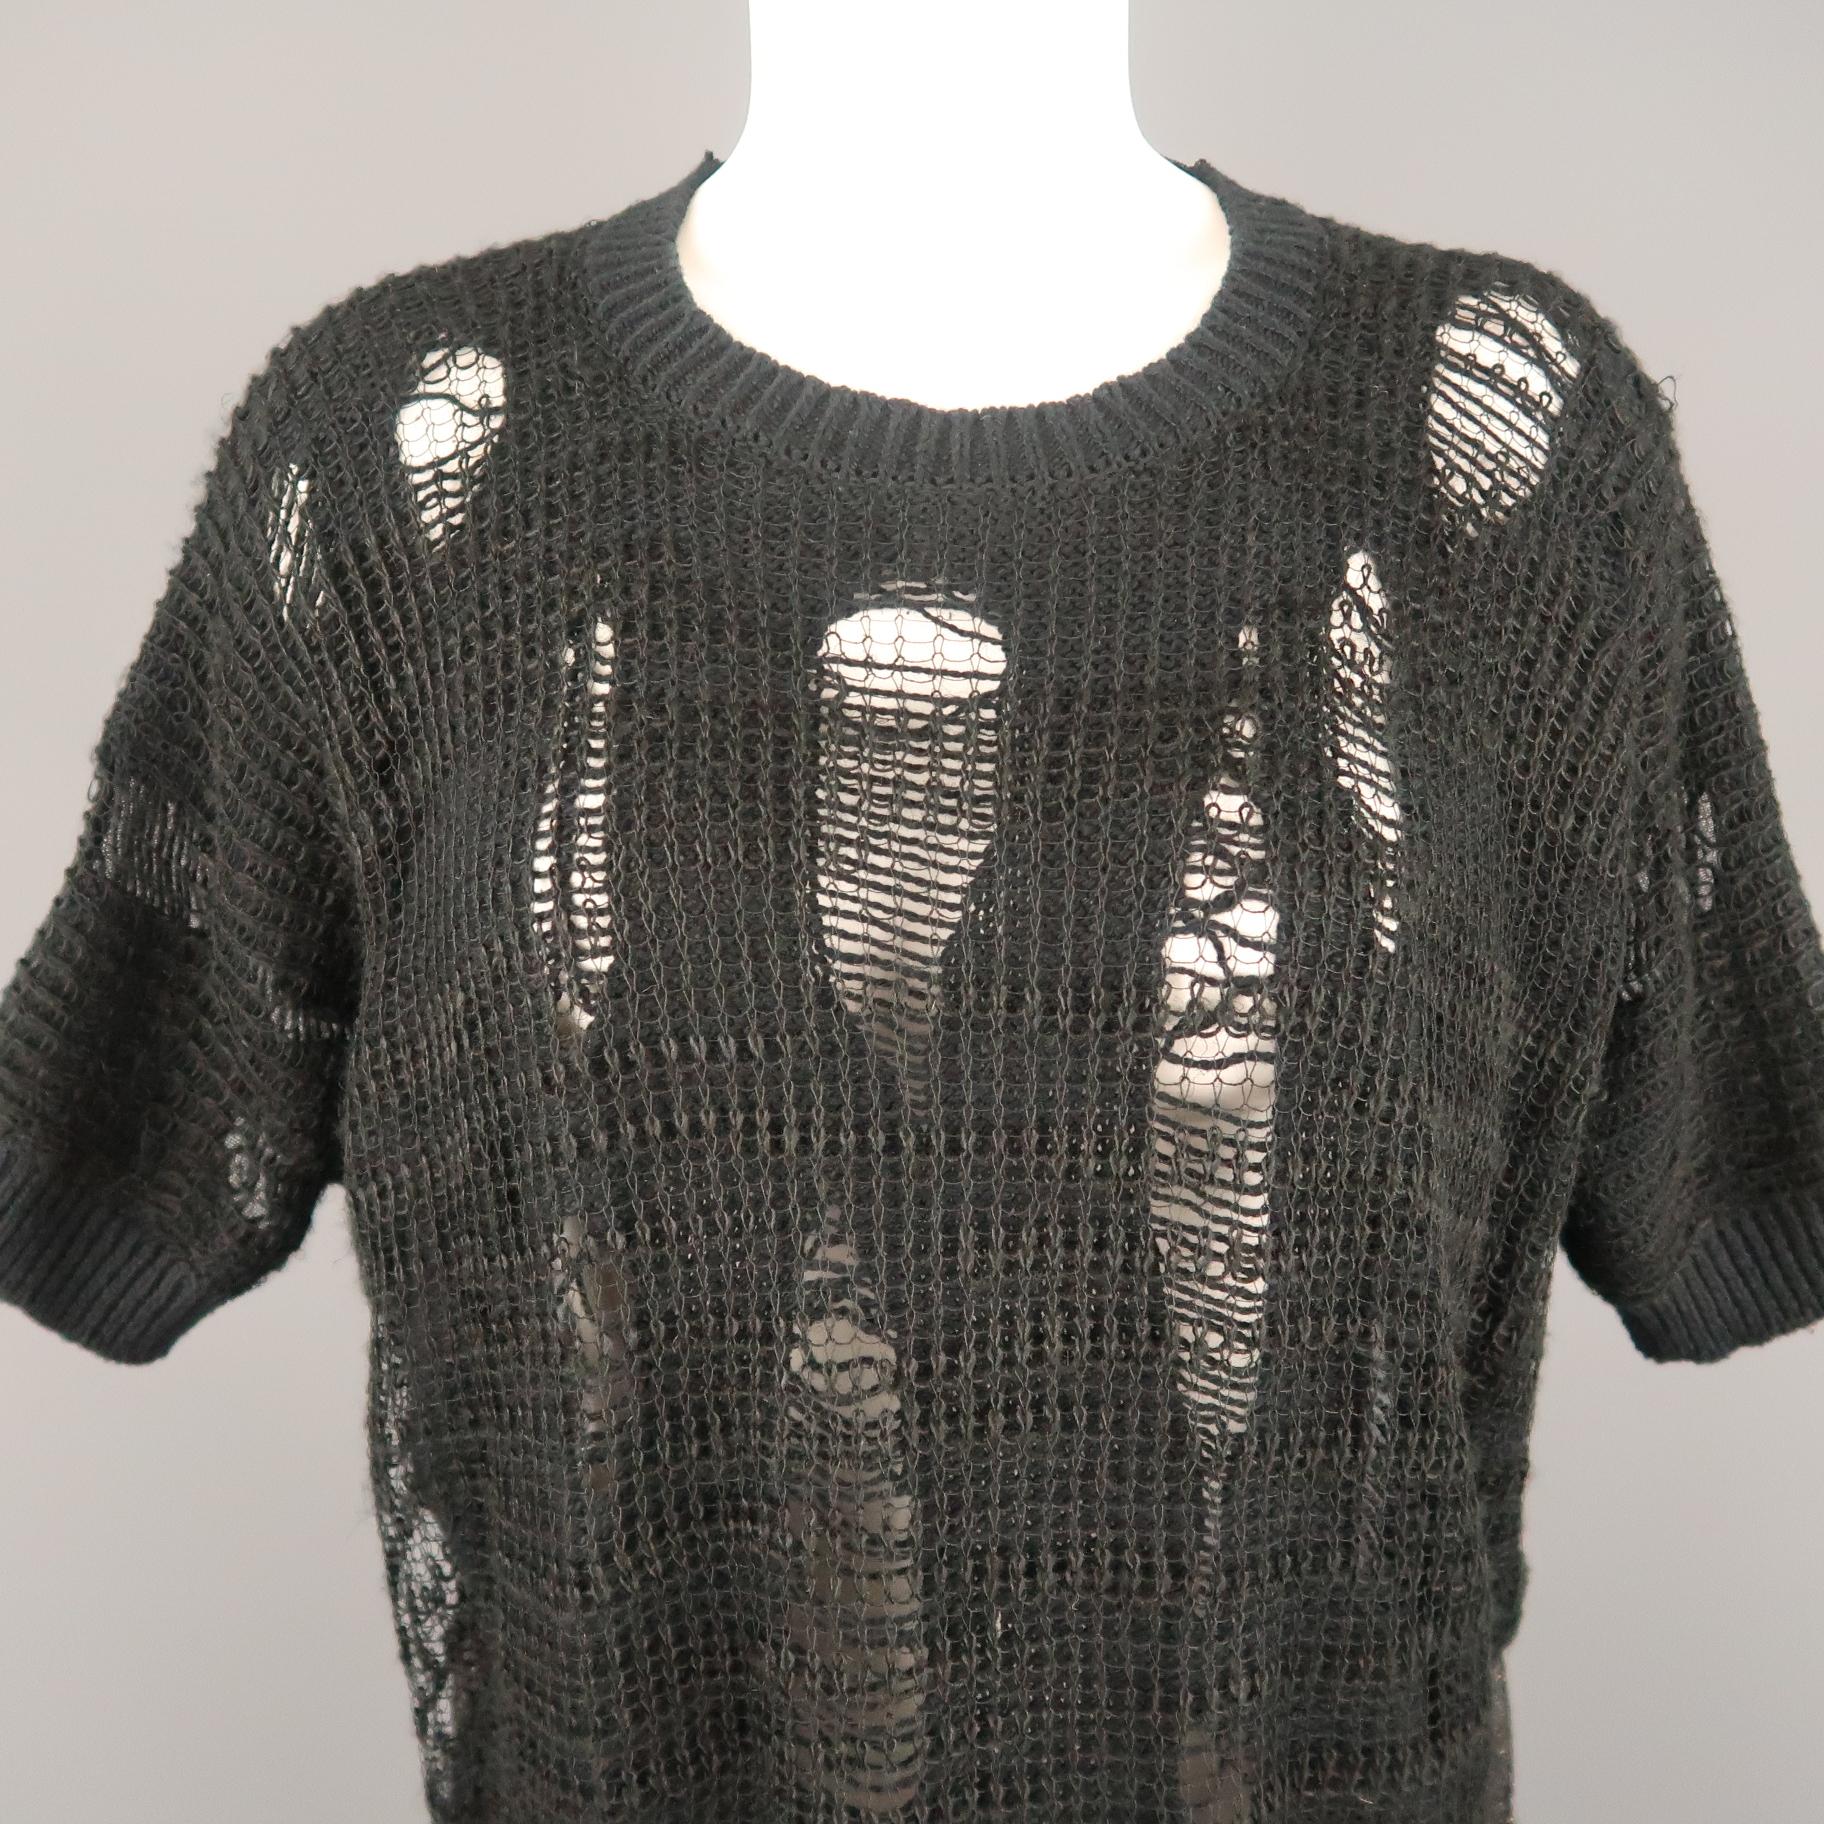 JUNYA WATANABE pullover features a distressed knit front with mesh knit overlay, short batwing sleeves, crewneck, and sheer sparkle knit back. Made in Japan.
 
Excellent Pre-Owned Condition.
Marked: S (AD2015)
 
Measurements:
 
Shoulder: 20